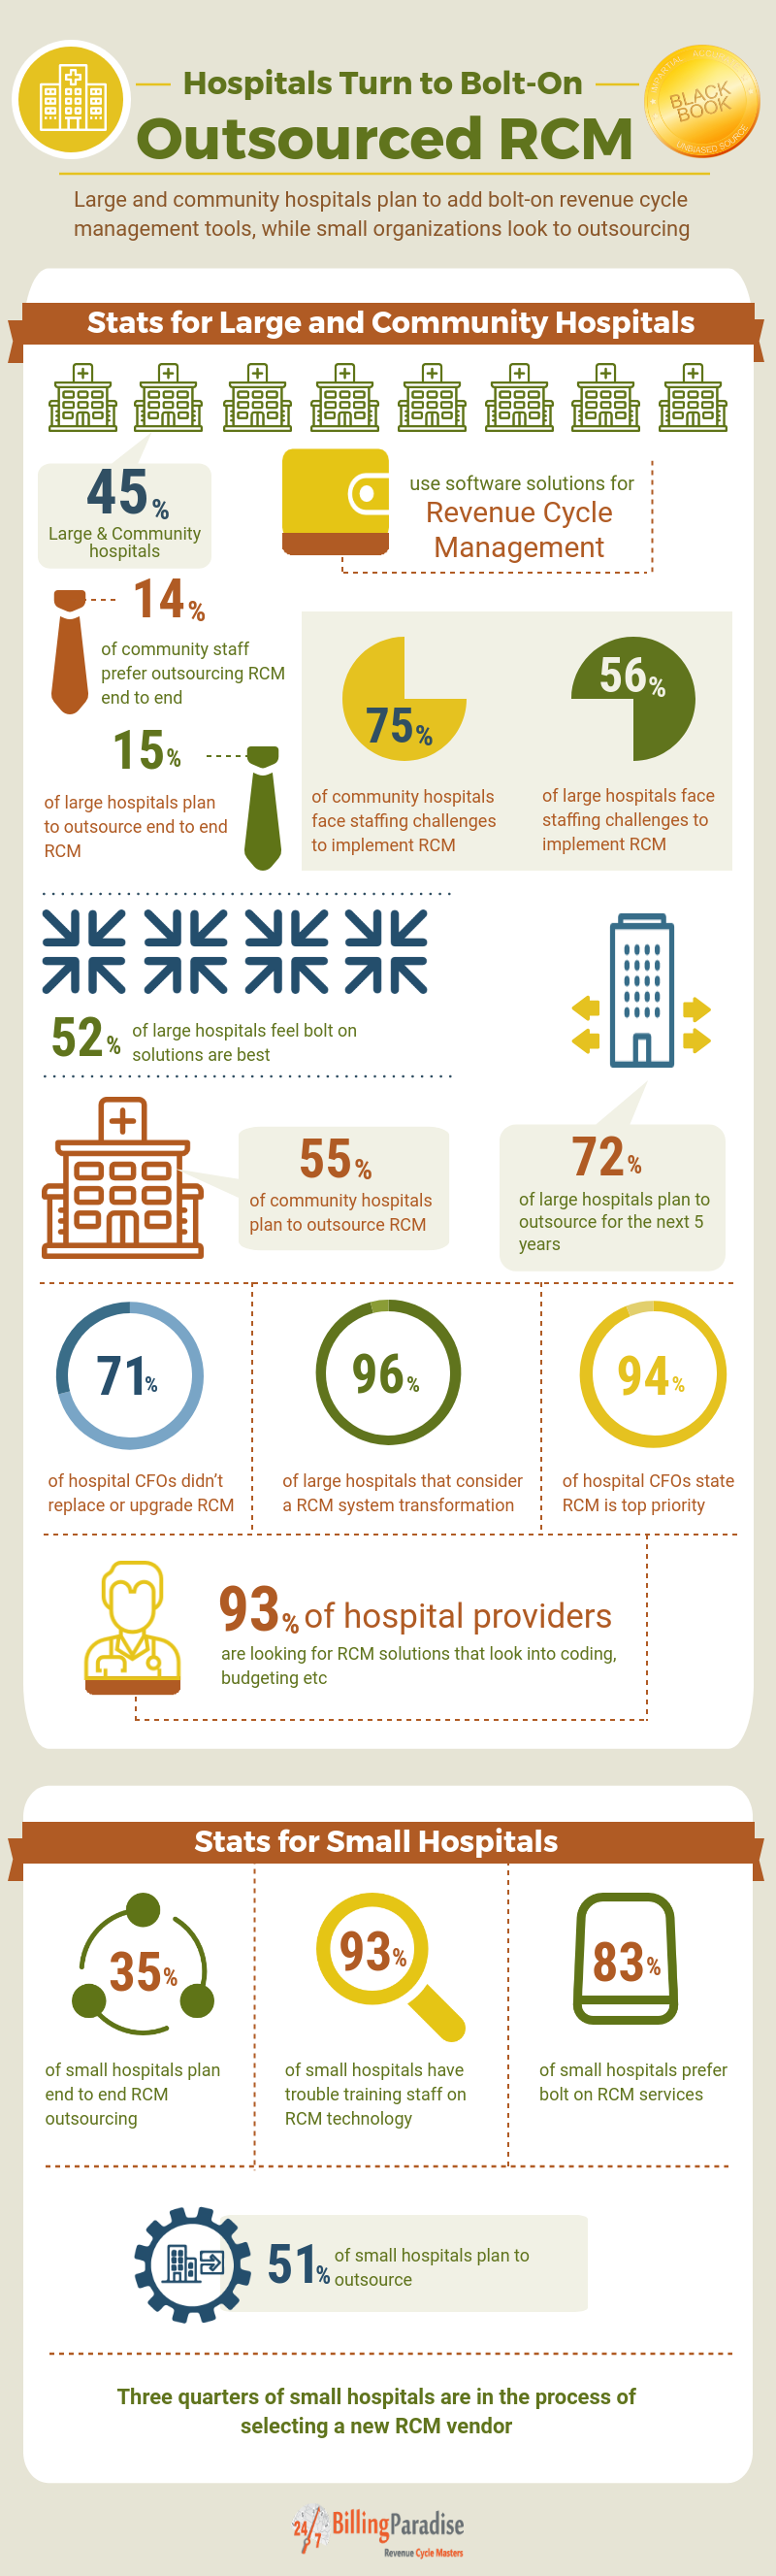 RCM Solutions for Hospitals and Small Practices